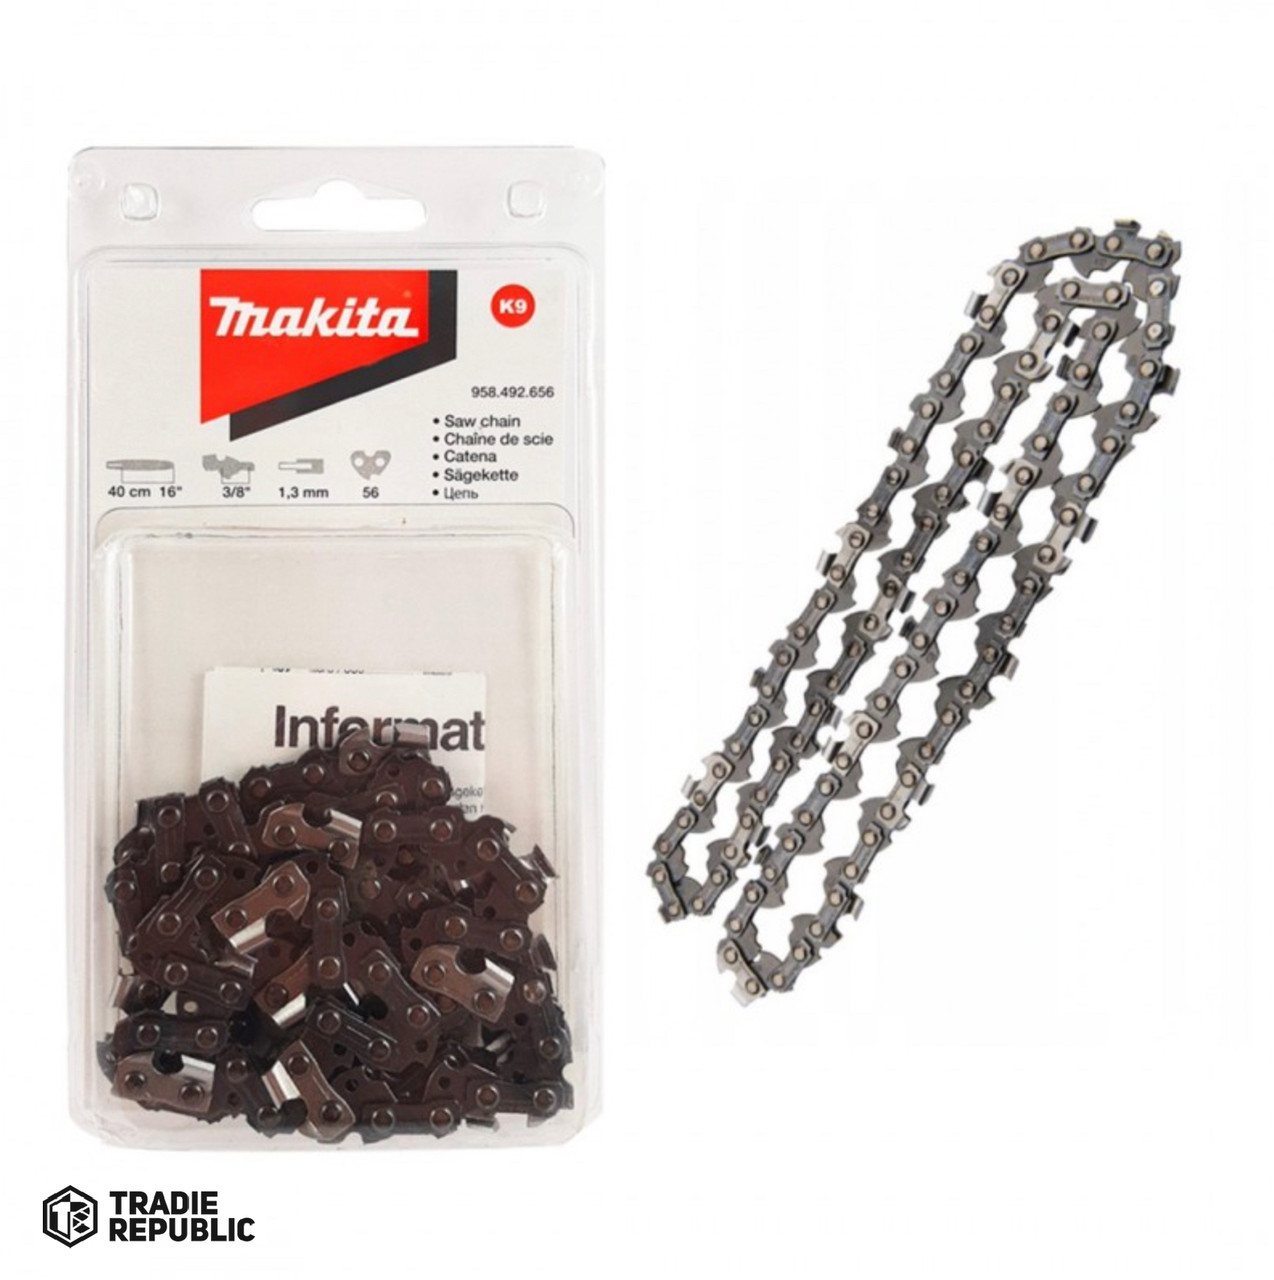 958.492.656 Makita Spare 40cm 16'' Chain For Chainsaw K9